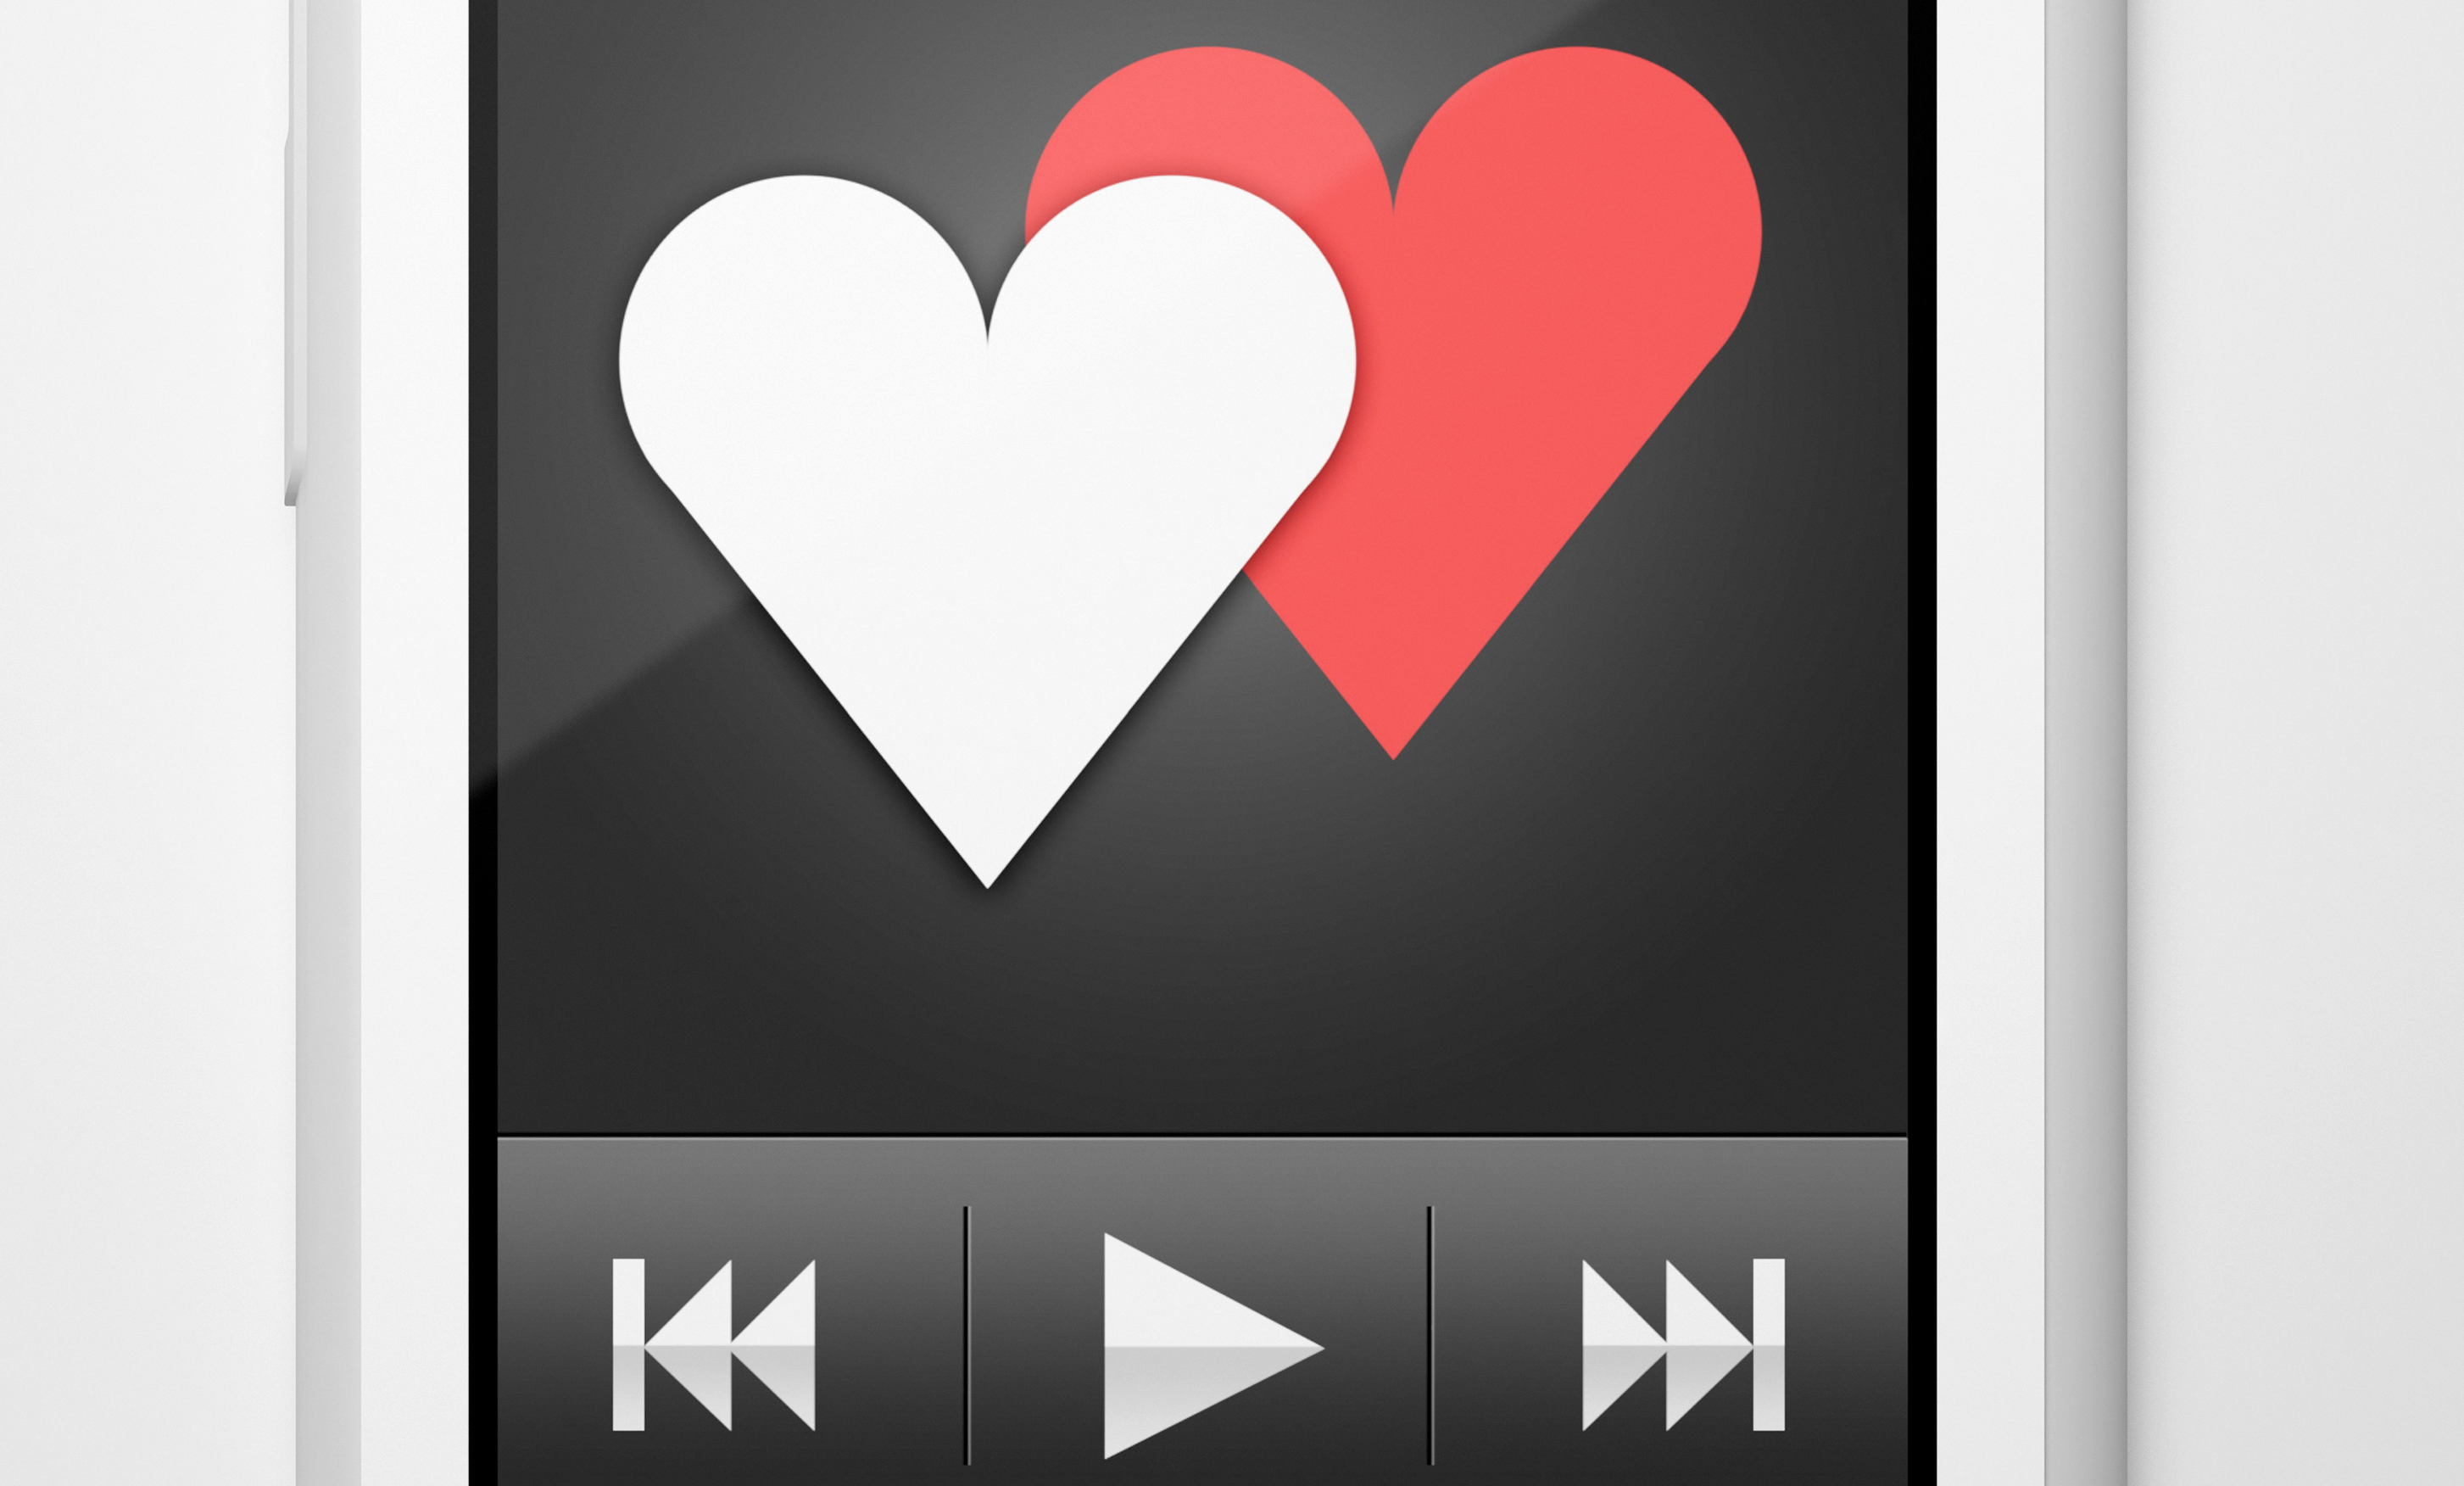 Promoted:Add your song to Gistnaija Valentine's Hot 10 Music